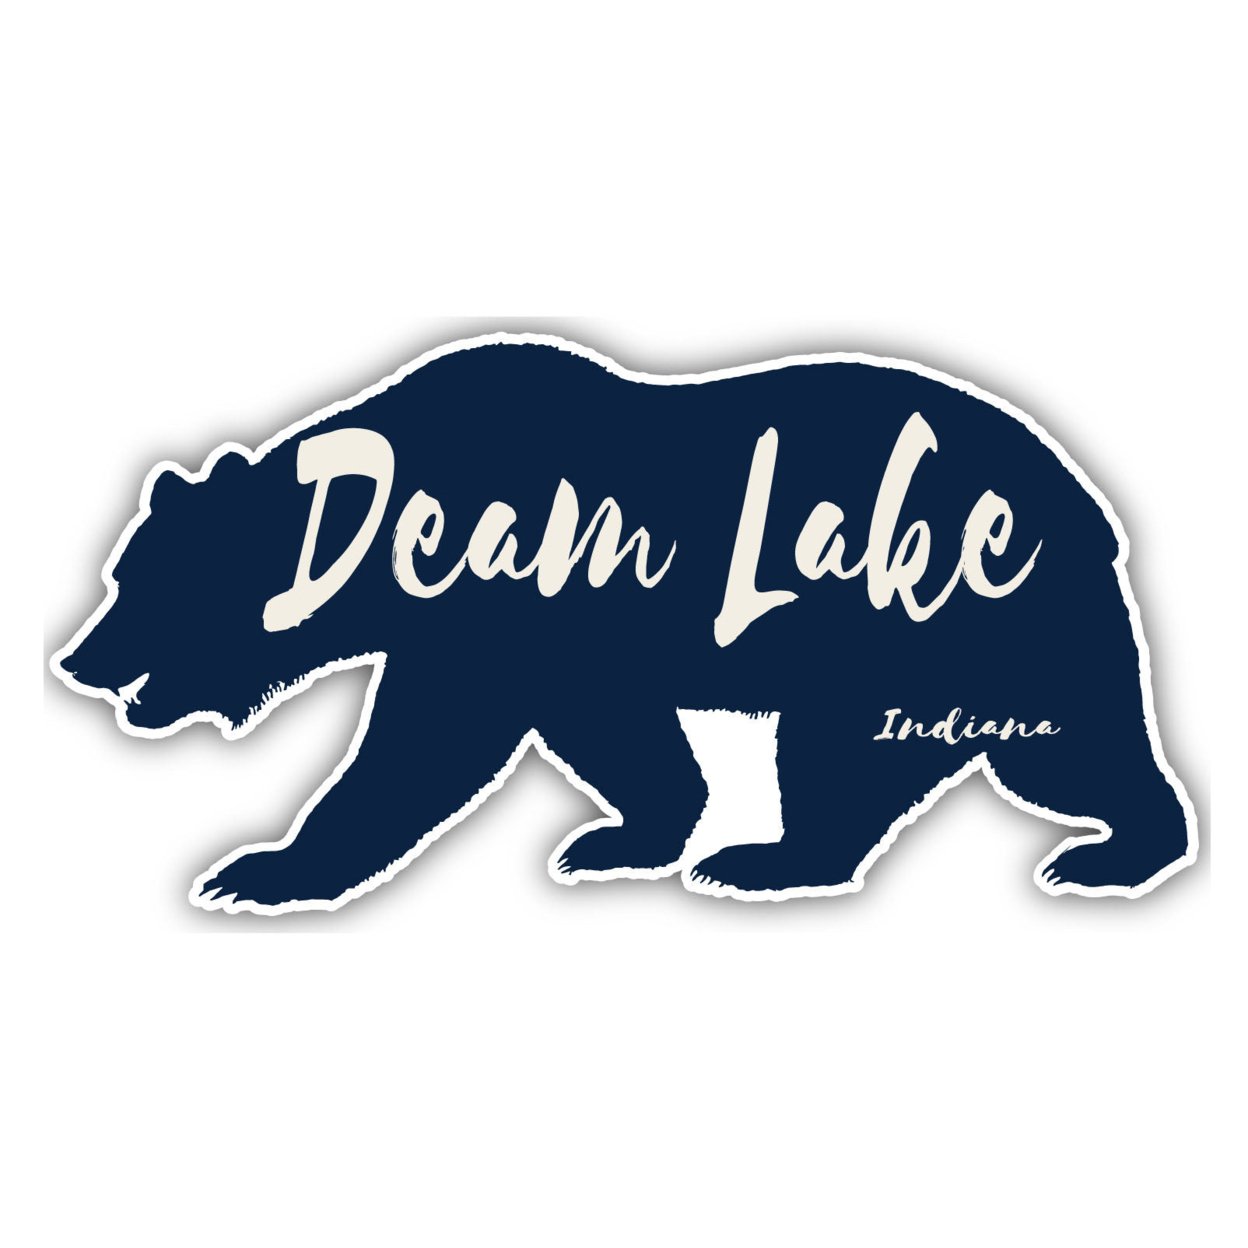 Deam Lake Indiana Souvenir Decorative Stickers (Choose Theme And Size) - 4-Pack, 4-Inch, Great Outdoors